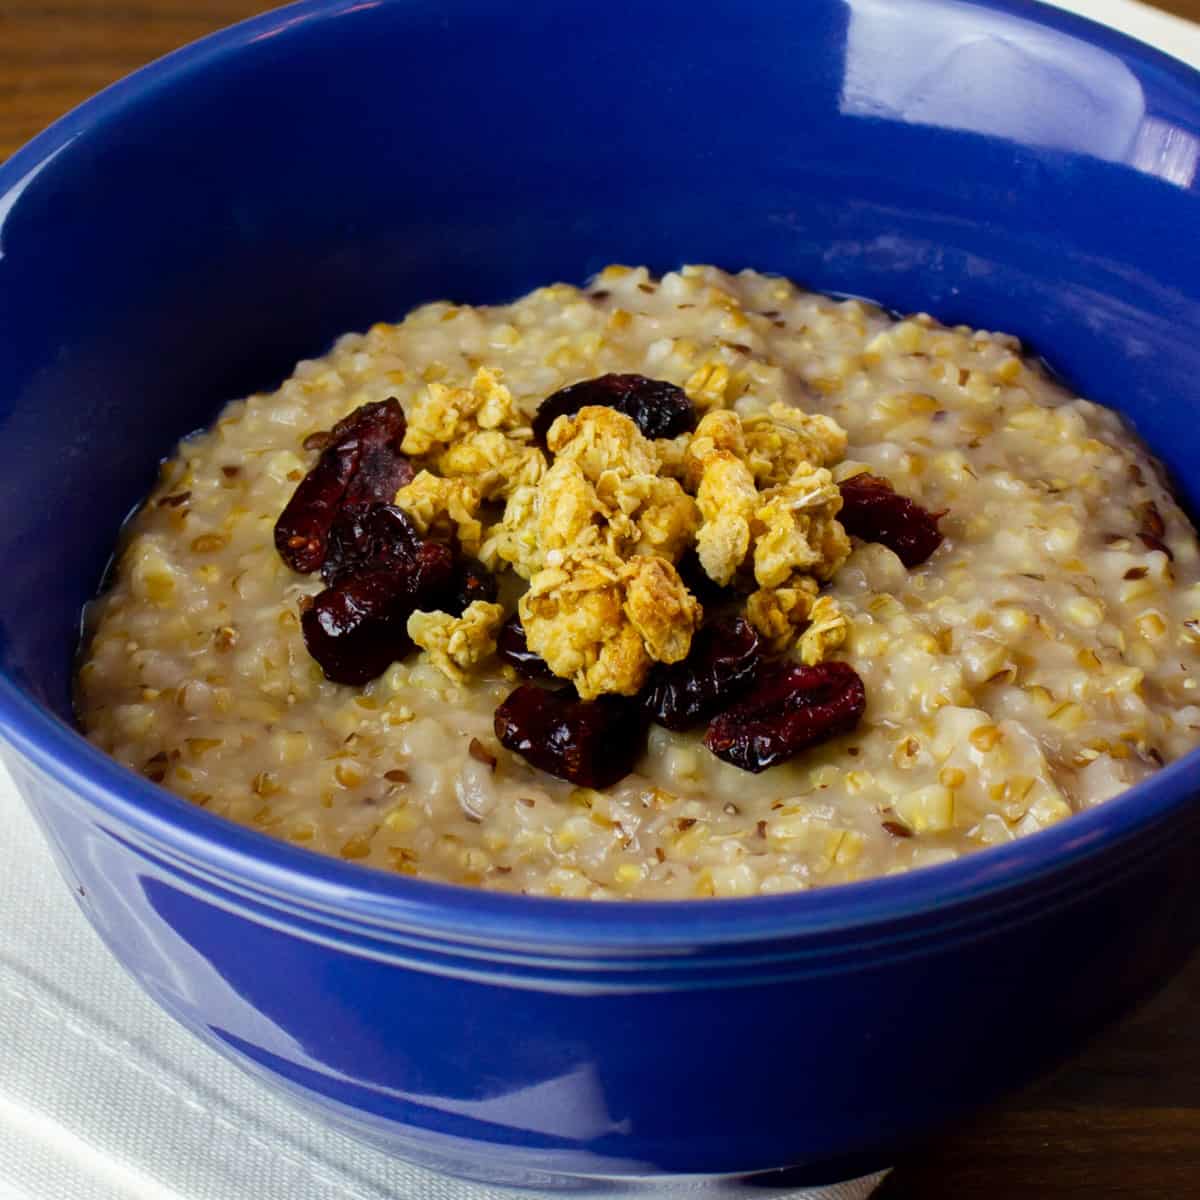 A bowl of oatmeal with dried cranberries and granola.